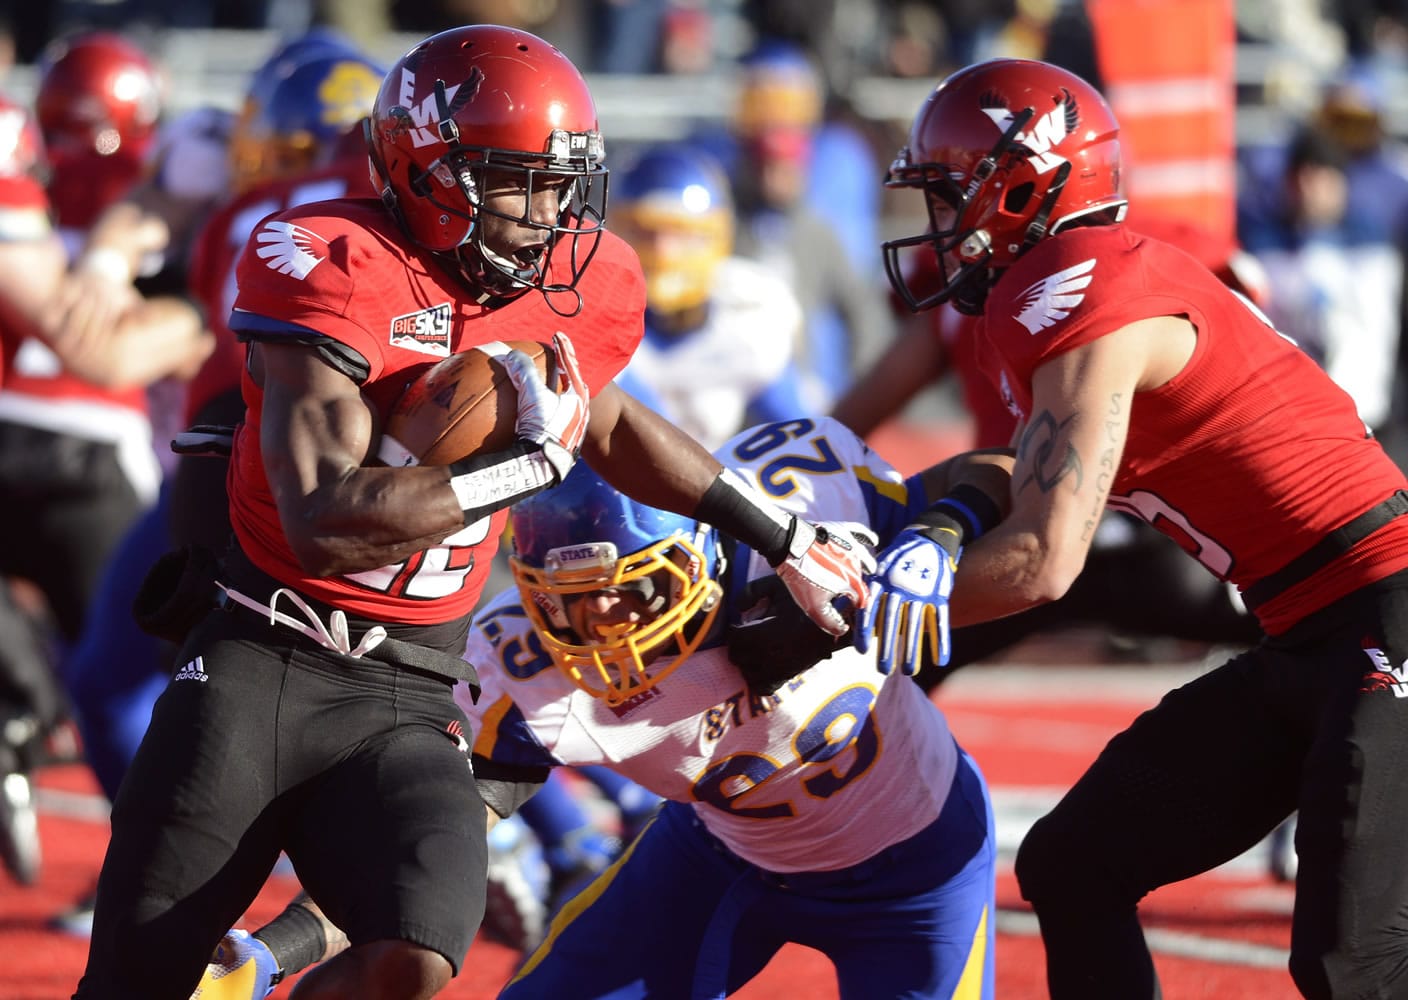 Eastern Washington Eagles running back Quincy Forte (22) ran for over 200 yards against South Dakota State, Saturday, Dec. 7, 2013, at Roos Field in Cheney, Wash.